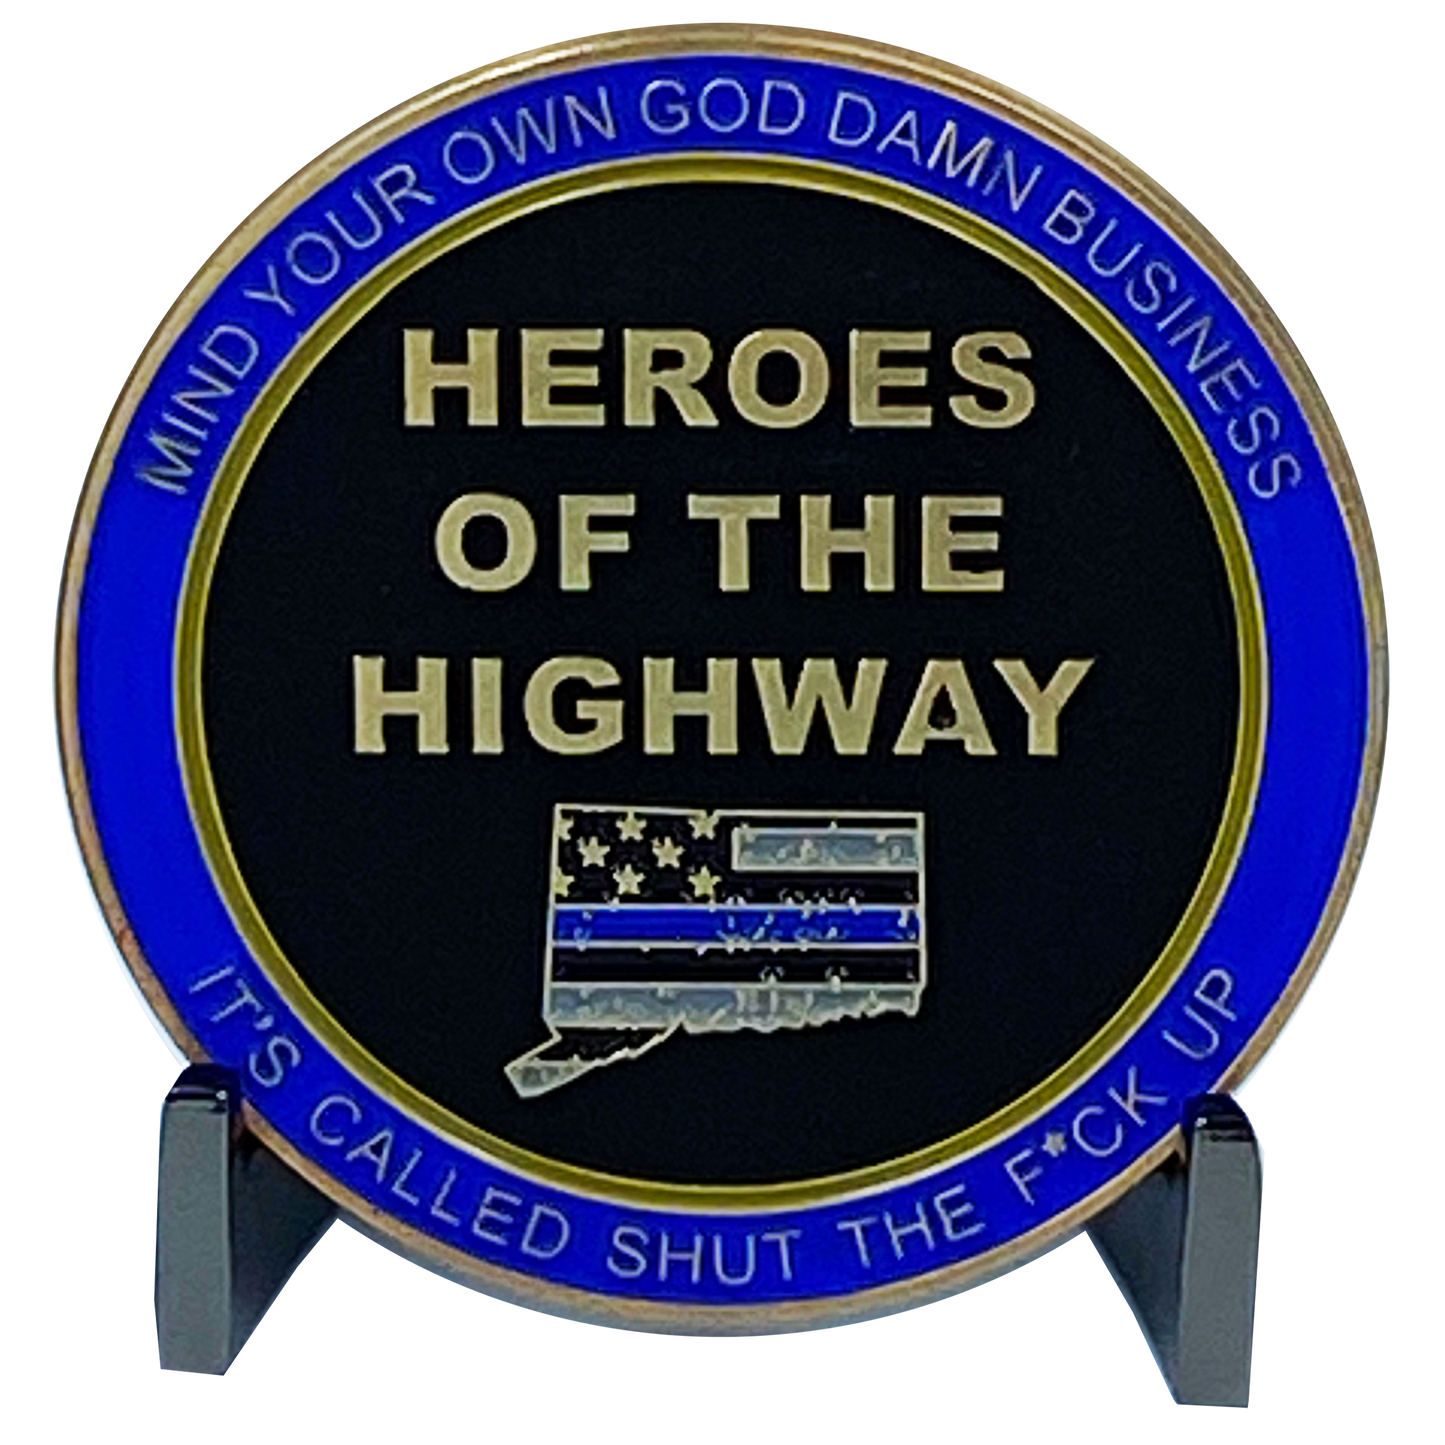 EL6-012 Heroes of the Highway Version 4 Heat Seeker Edition "Late for your Job at Nasa" CSP Challenge Coin inspired by Connecticut State Police CT Trooper Matthew Spina